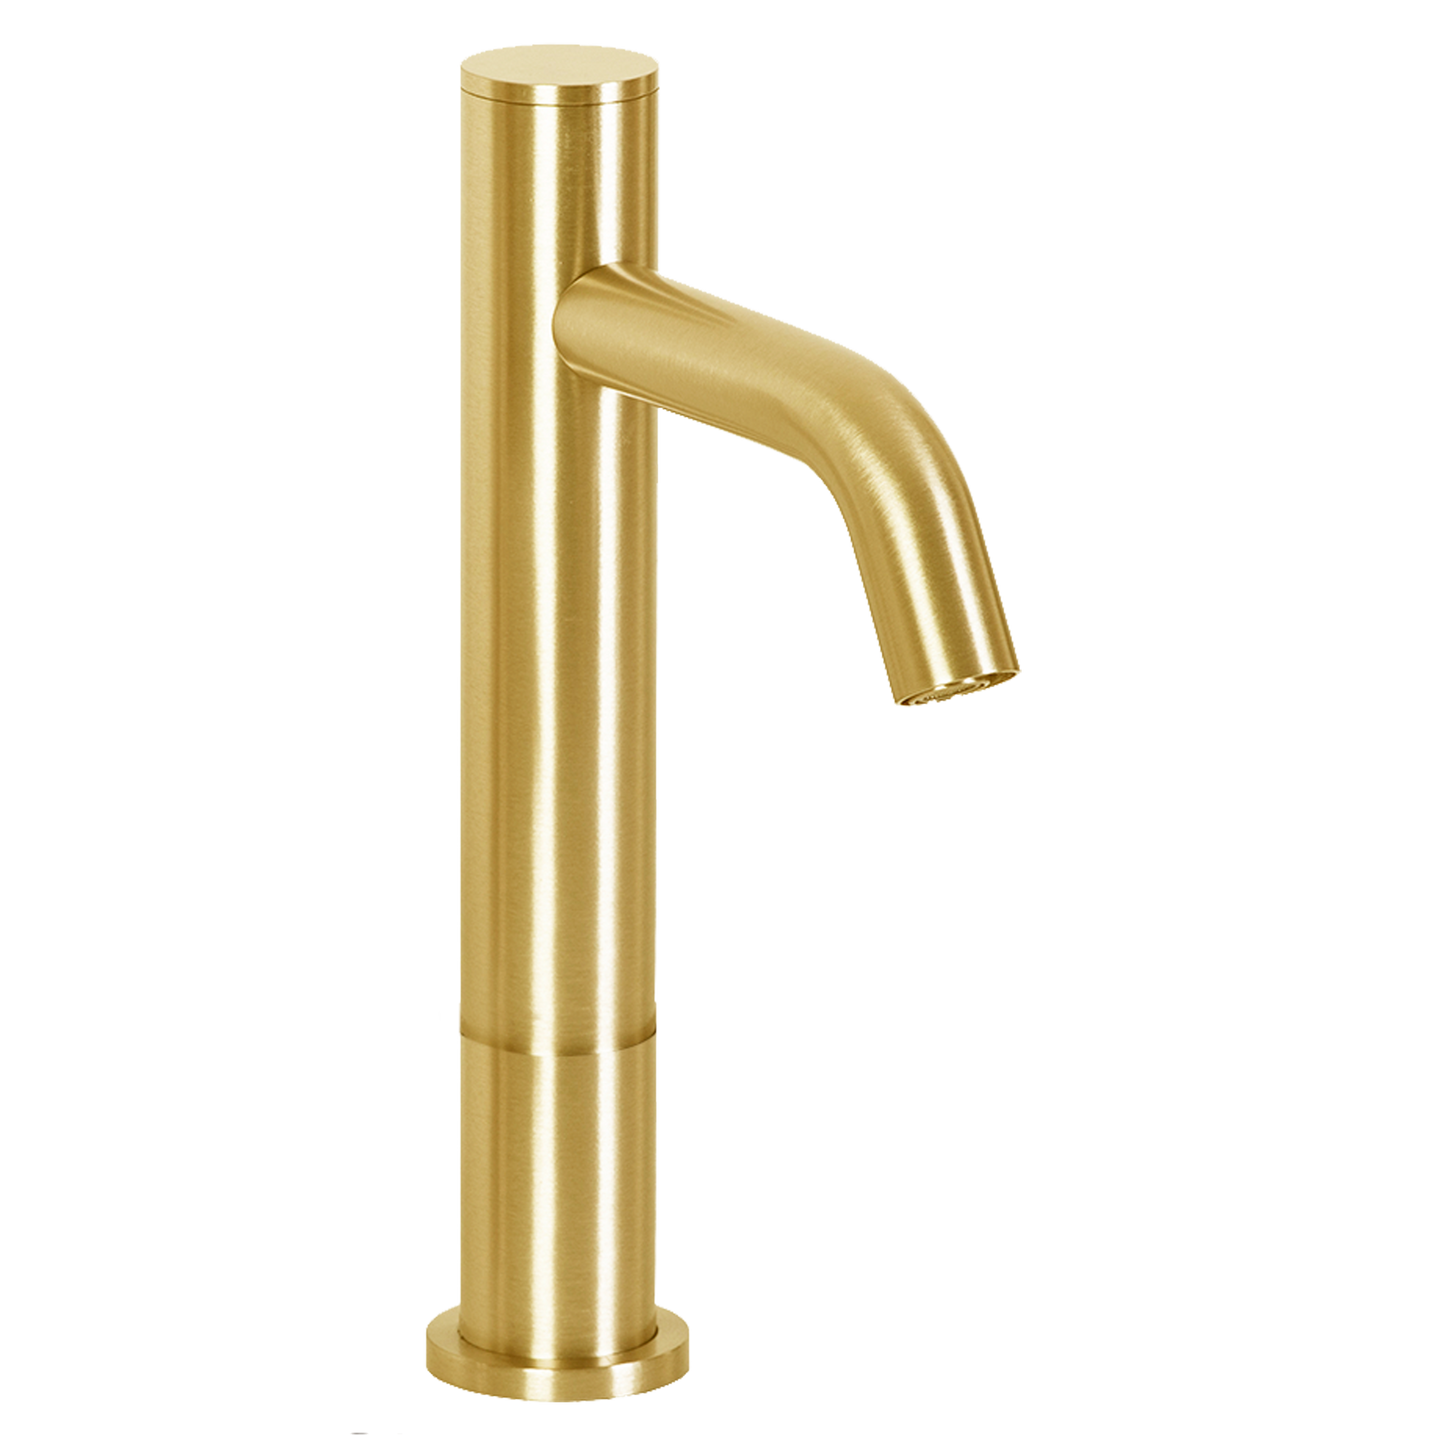 FA-3263 Automatic Faucet with 6” Spout Reach and 3” Riser In Satin Gold